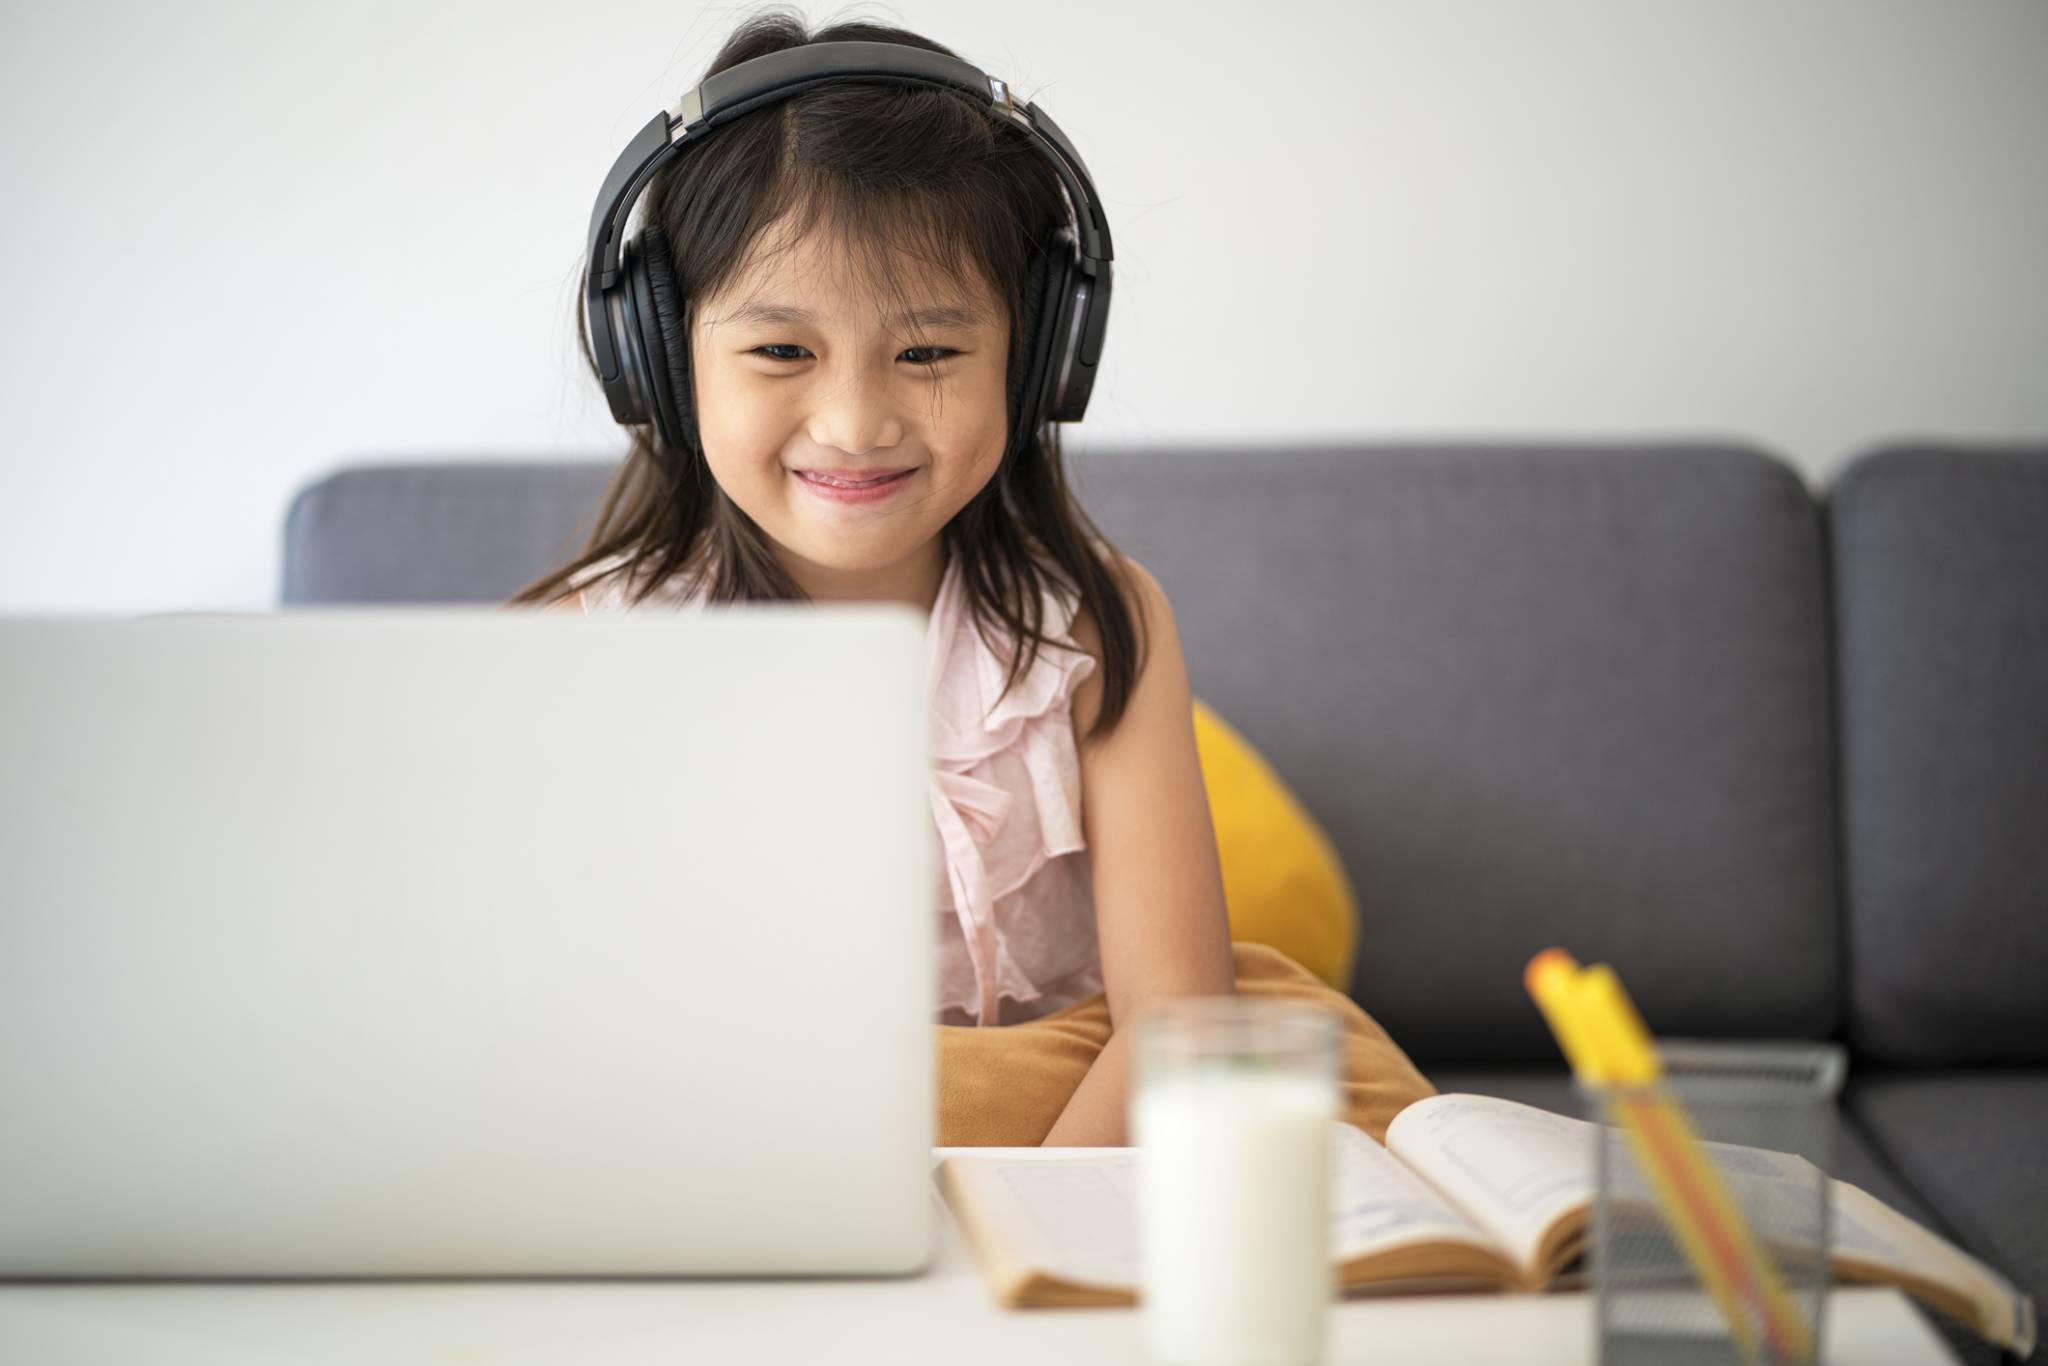 Screen time soars with online school, parents worry about health impact -  Mumbai News - Times of India